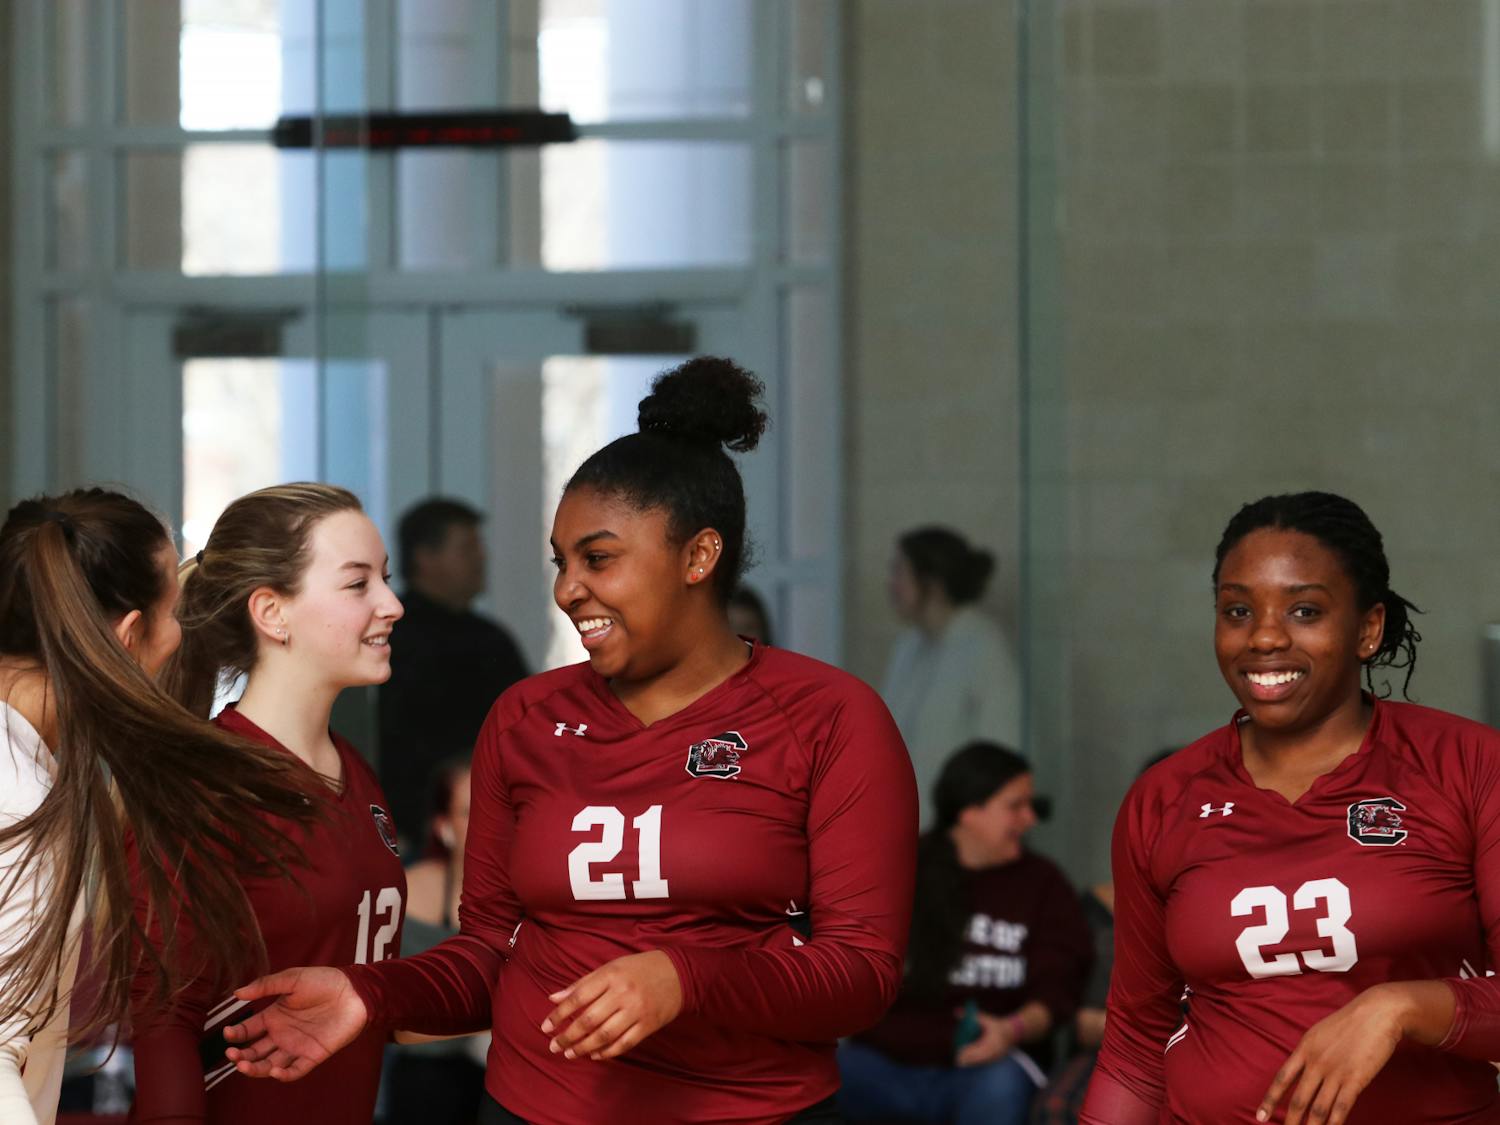 The women’s club volleyball team shares smiles after a successful rally by freshmen middle Andi Jones at its Gamecock Classic tournament on Feb. 4, 2023. The garnet team features freshman middle Andi Jones, senior setter Preya Simmons, freshman outside Jessica Layton and freshman libero/DS Gracie Kilgrore, all of who use the sports as a means to destress from school and life.